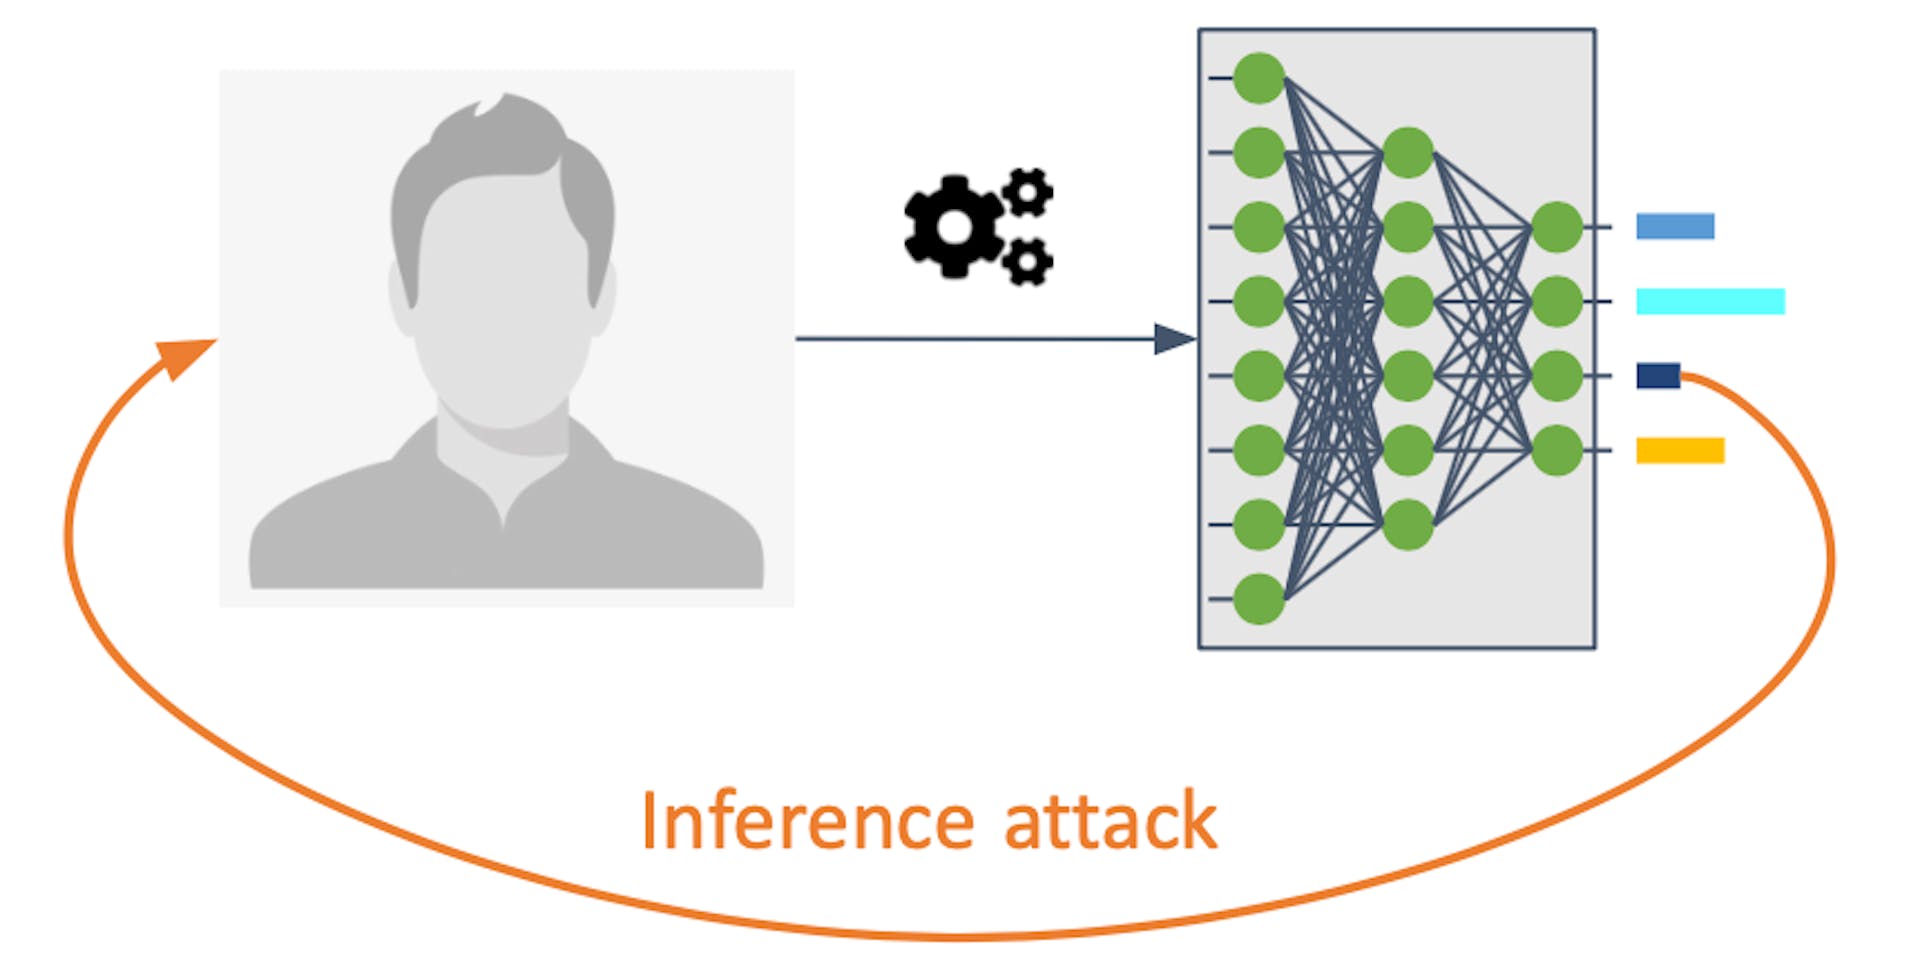 Inference attack